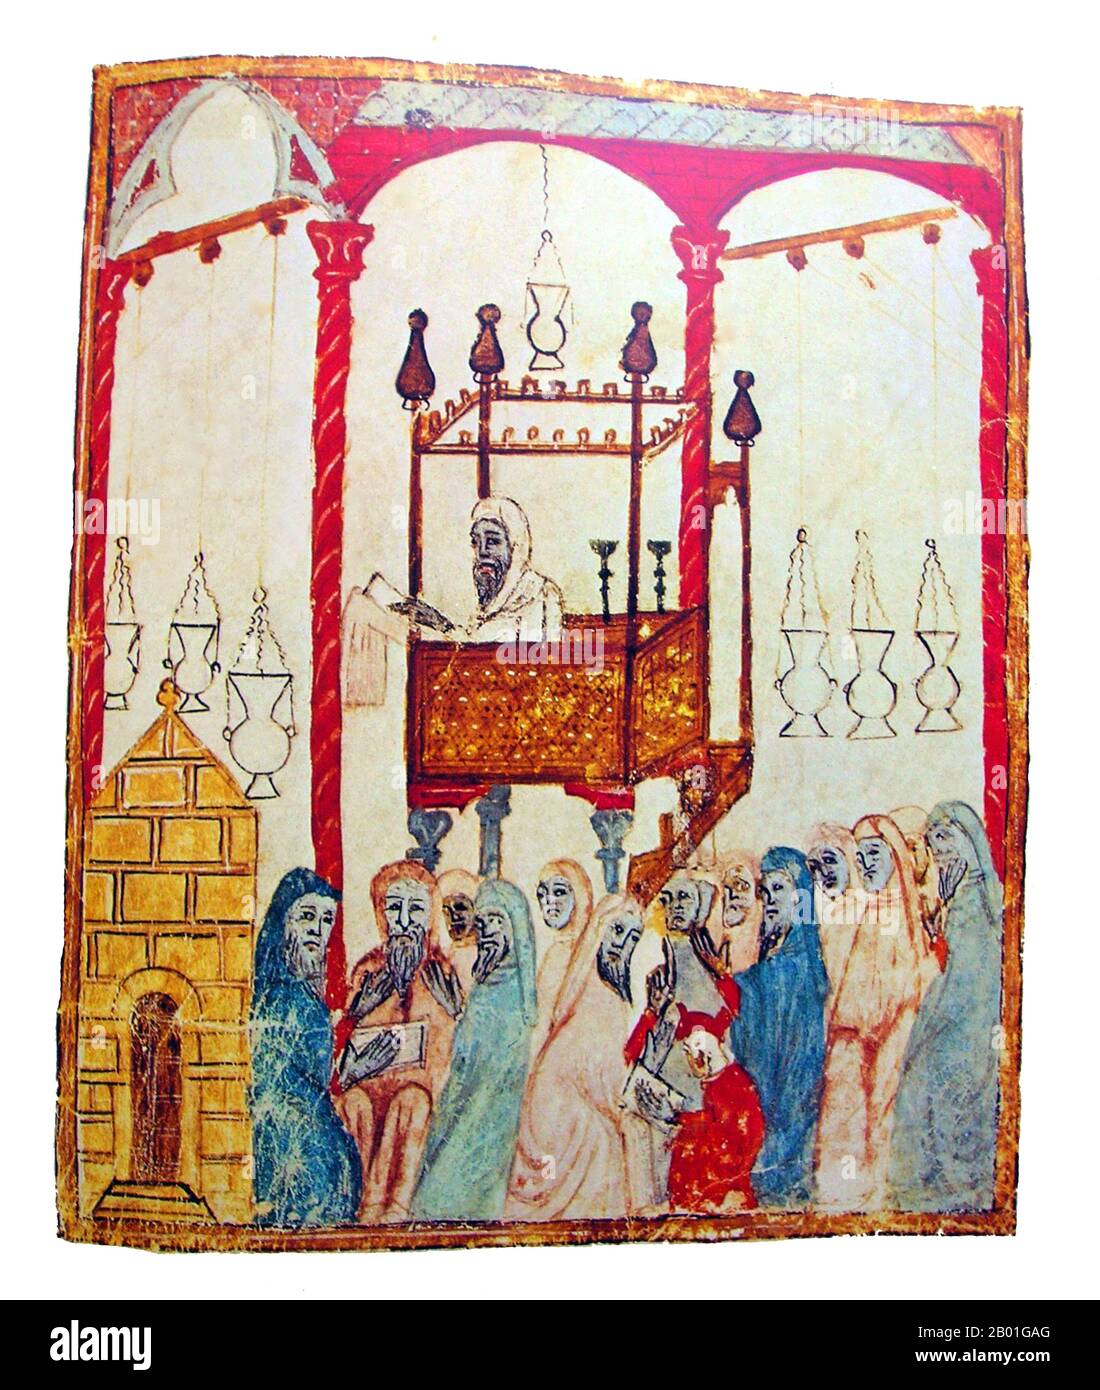 Spain/Al-Andalus: Illustration of a Jewish cantor standing on a bimah reading the Passover story in al-Andalus, from a 14th century Spanish Haggadah.  Al-Andalus was the Arabic name given to a nation and territorial region also commonly referred to as Moorish Iberia. The name describes parts of the Iberian Peninsula and Septimania governed by Muslims (often given the generic name of Moors), at various times in the period between 711 and 1492, although the territorial boundaries underwent constant changes due to wars with the Christian Kingdoms. Stock Photo